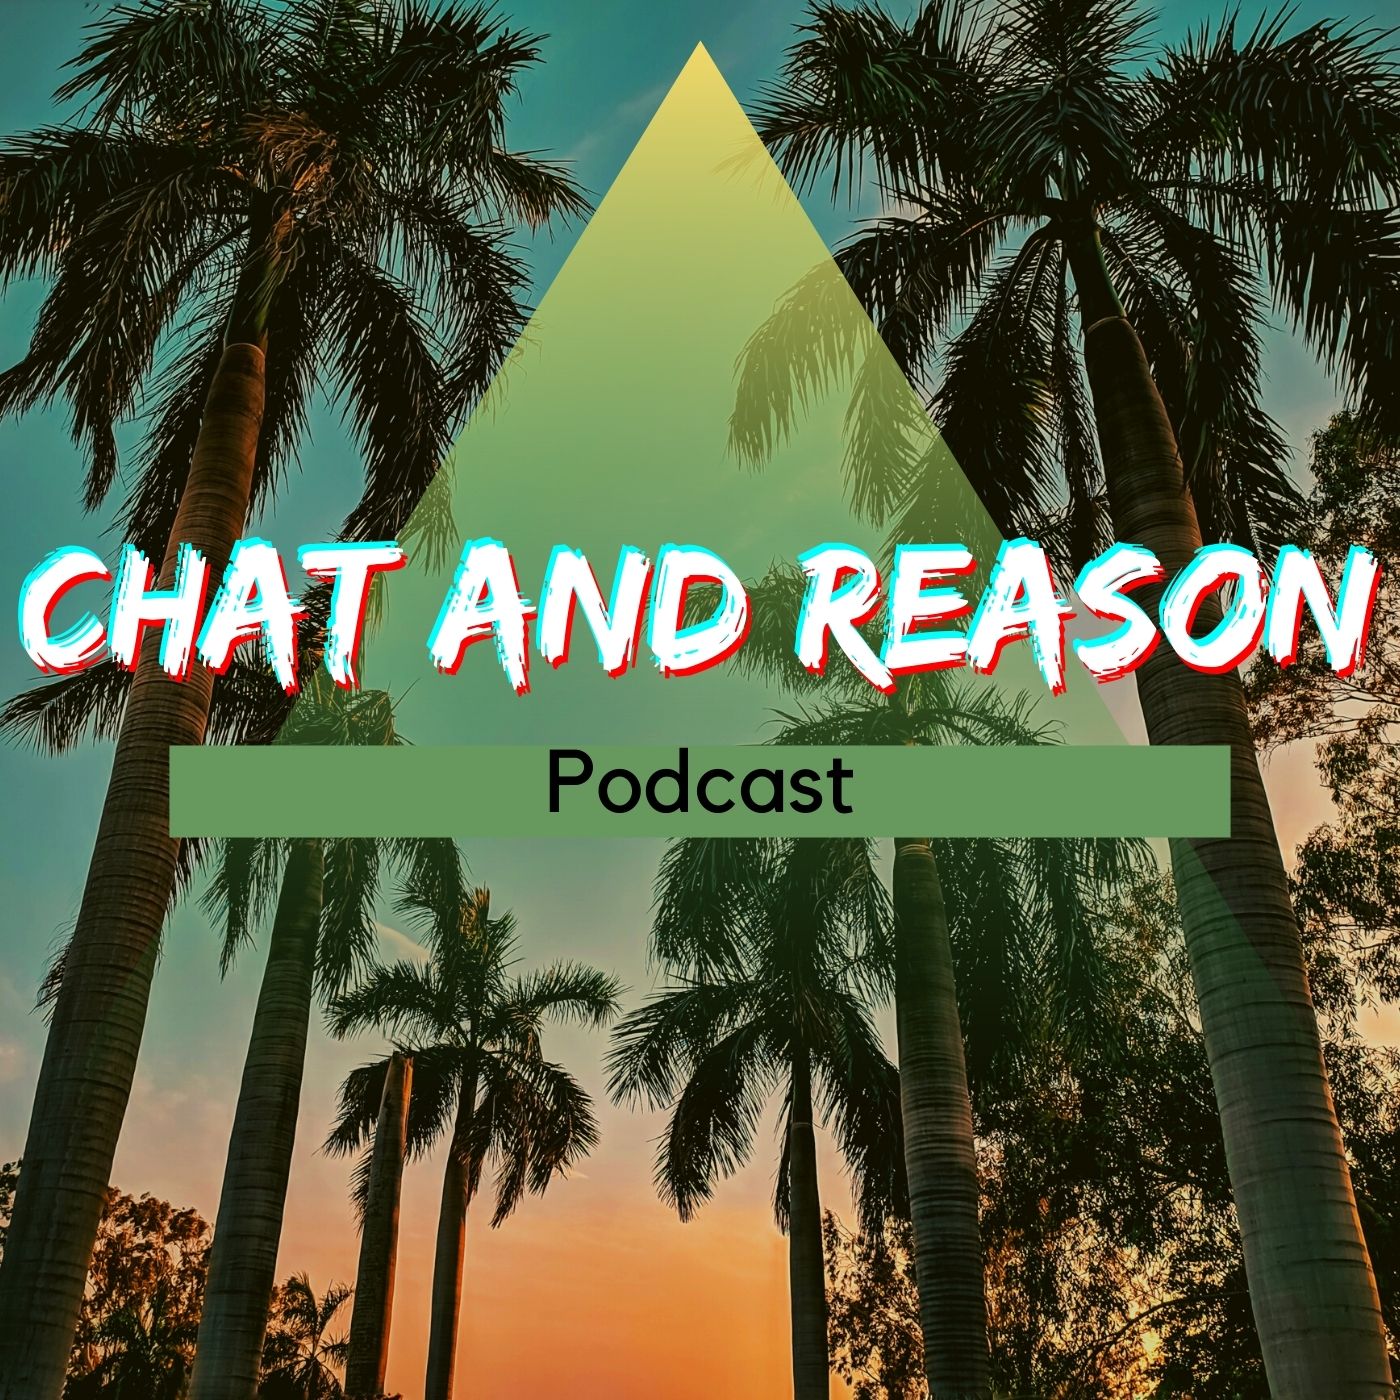 Artwork for podcast Chat and Reason